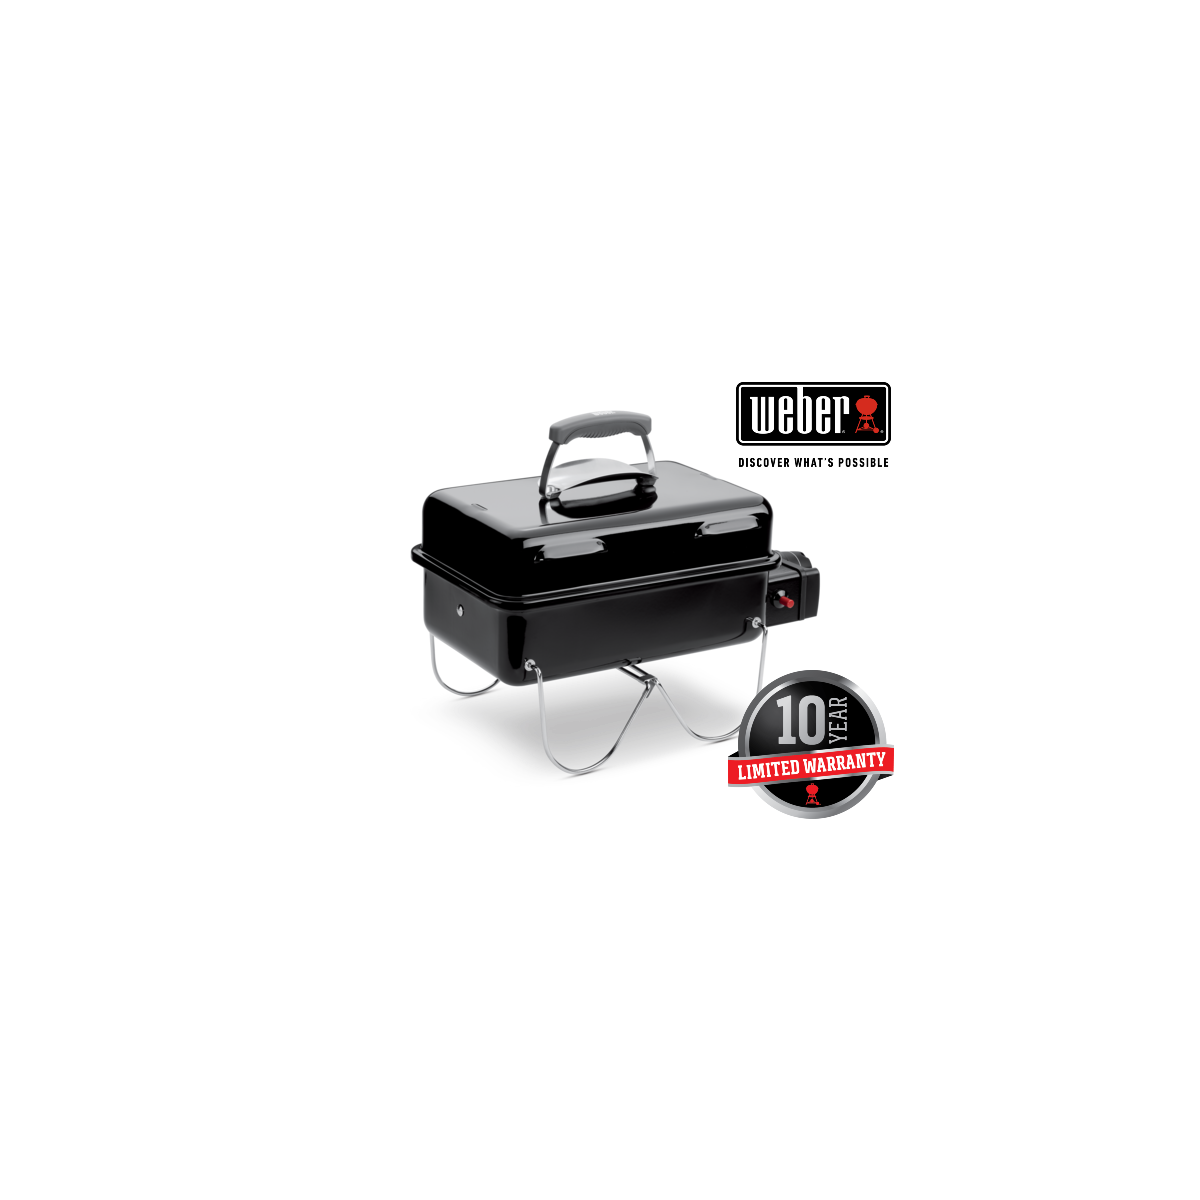 WEBER gas grill Go‐Anywhere Gas 1141068